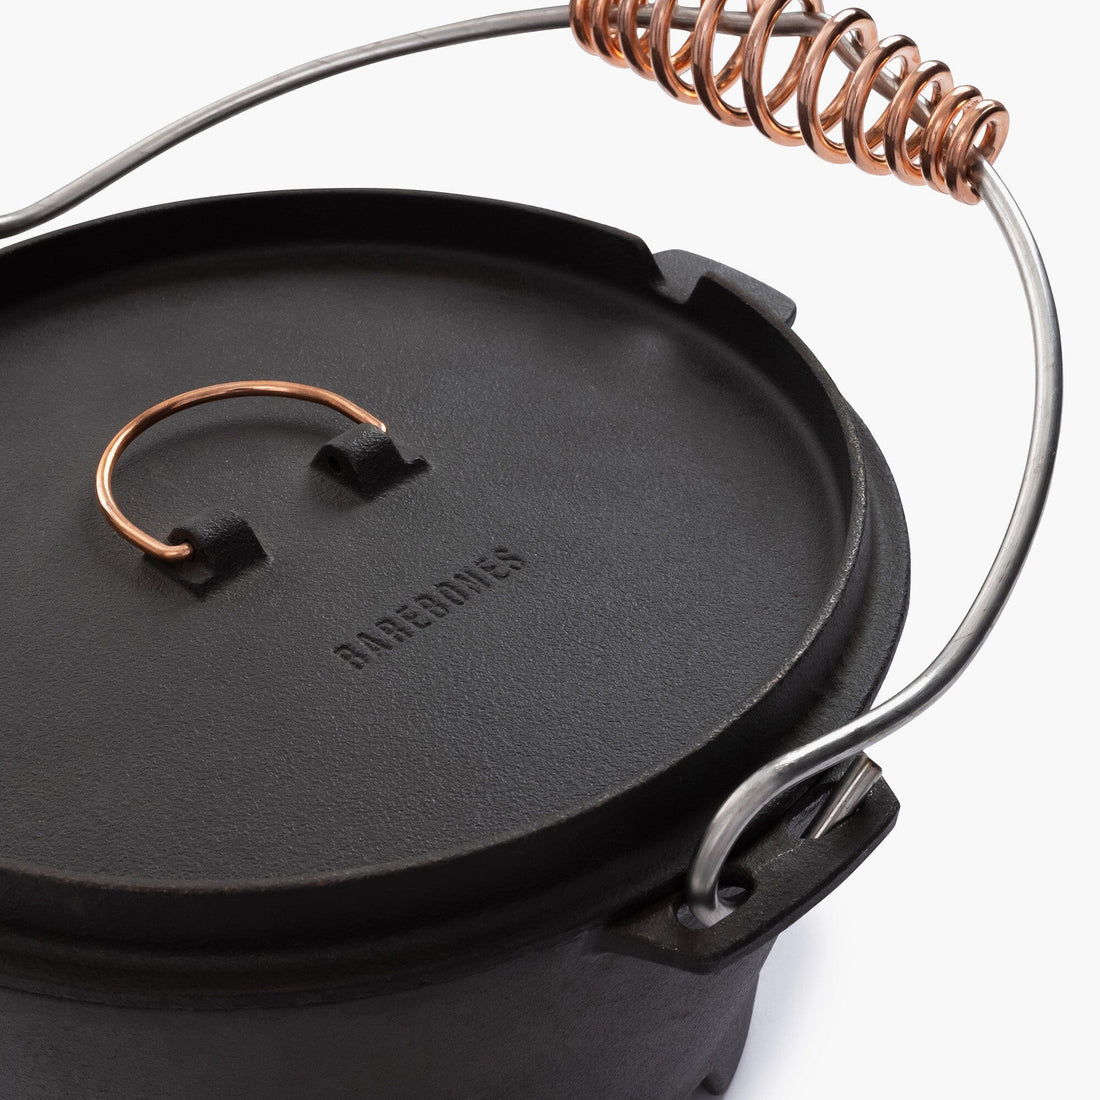 Camping Dutch Ovens: Iron vs Aluminum - Outdoors with Bear Grylls